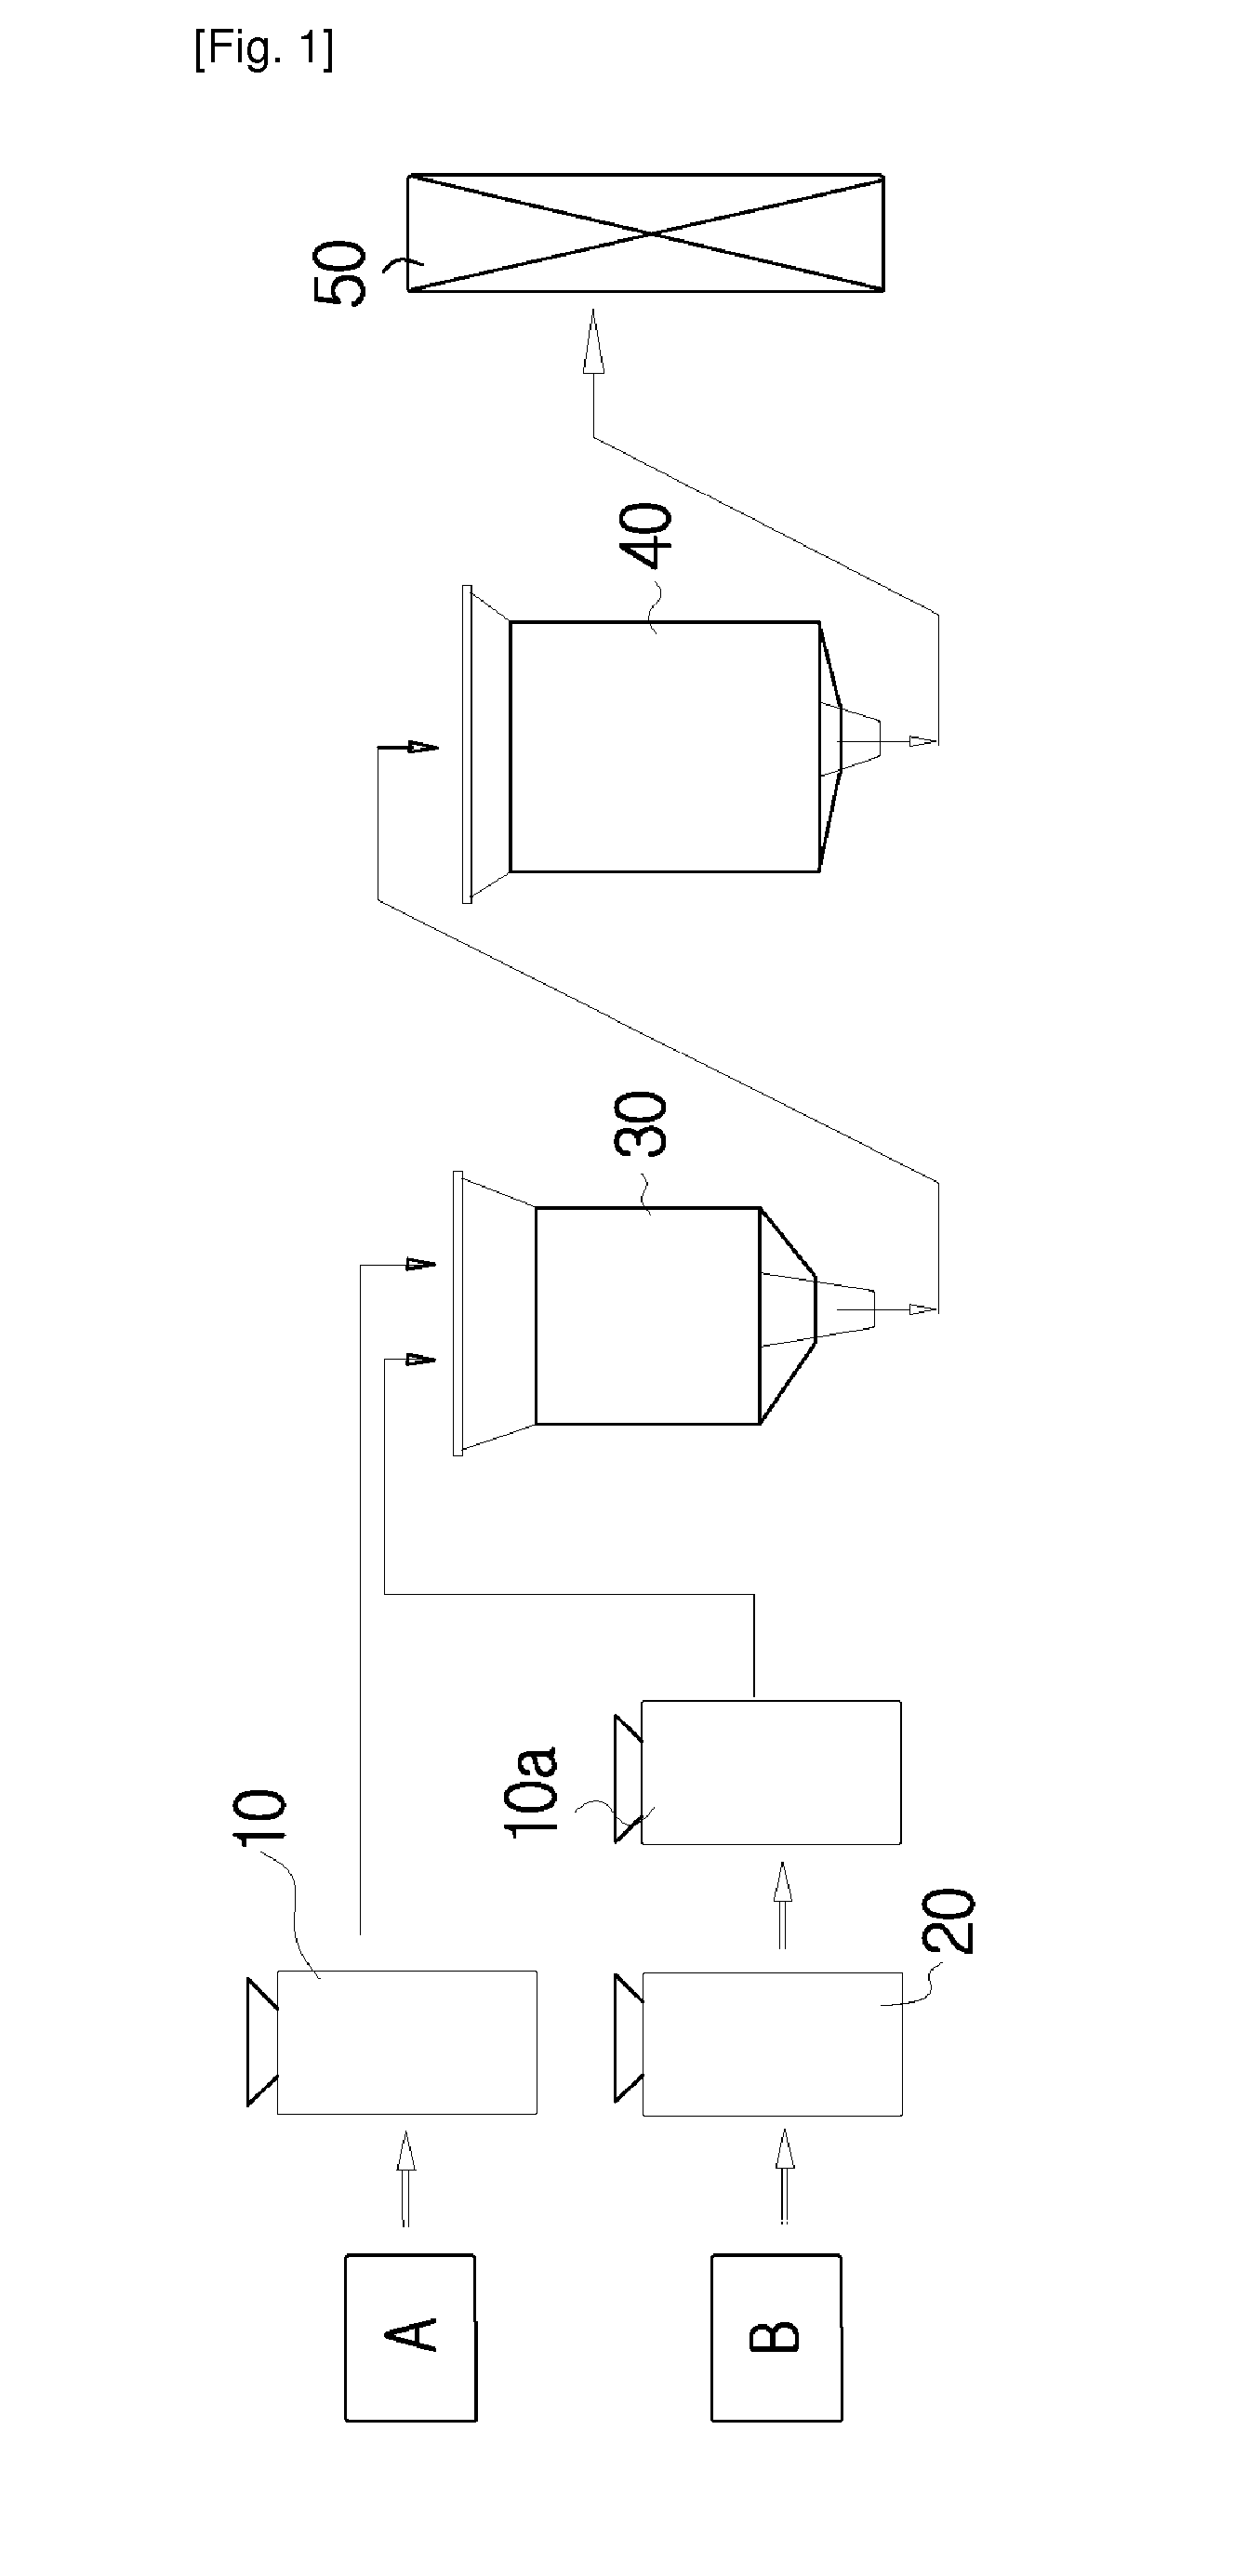 Method of producing earthworm castings using solid fuel ash and earthworm bed for producing earthworm castings